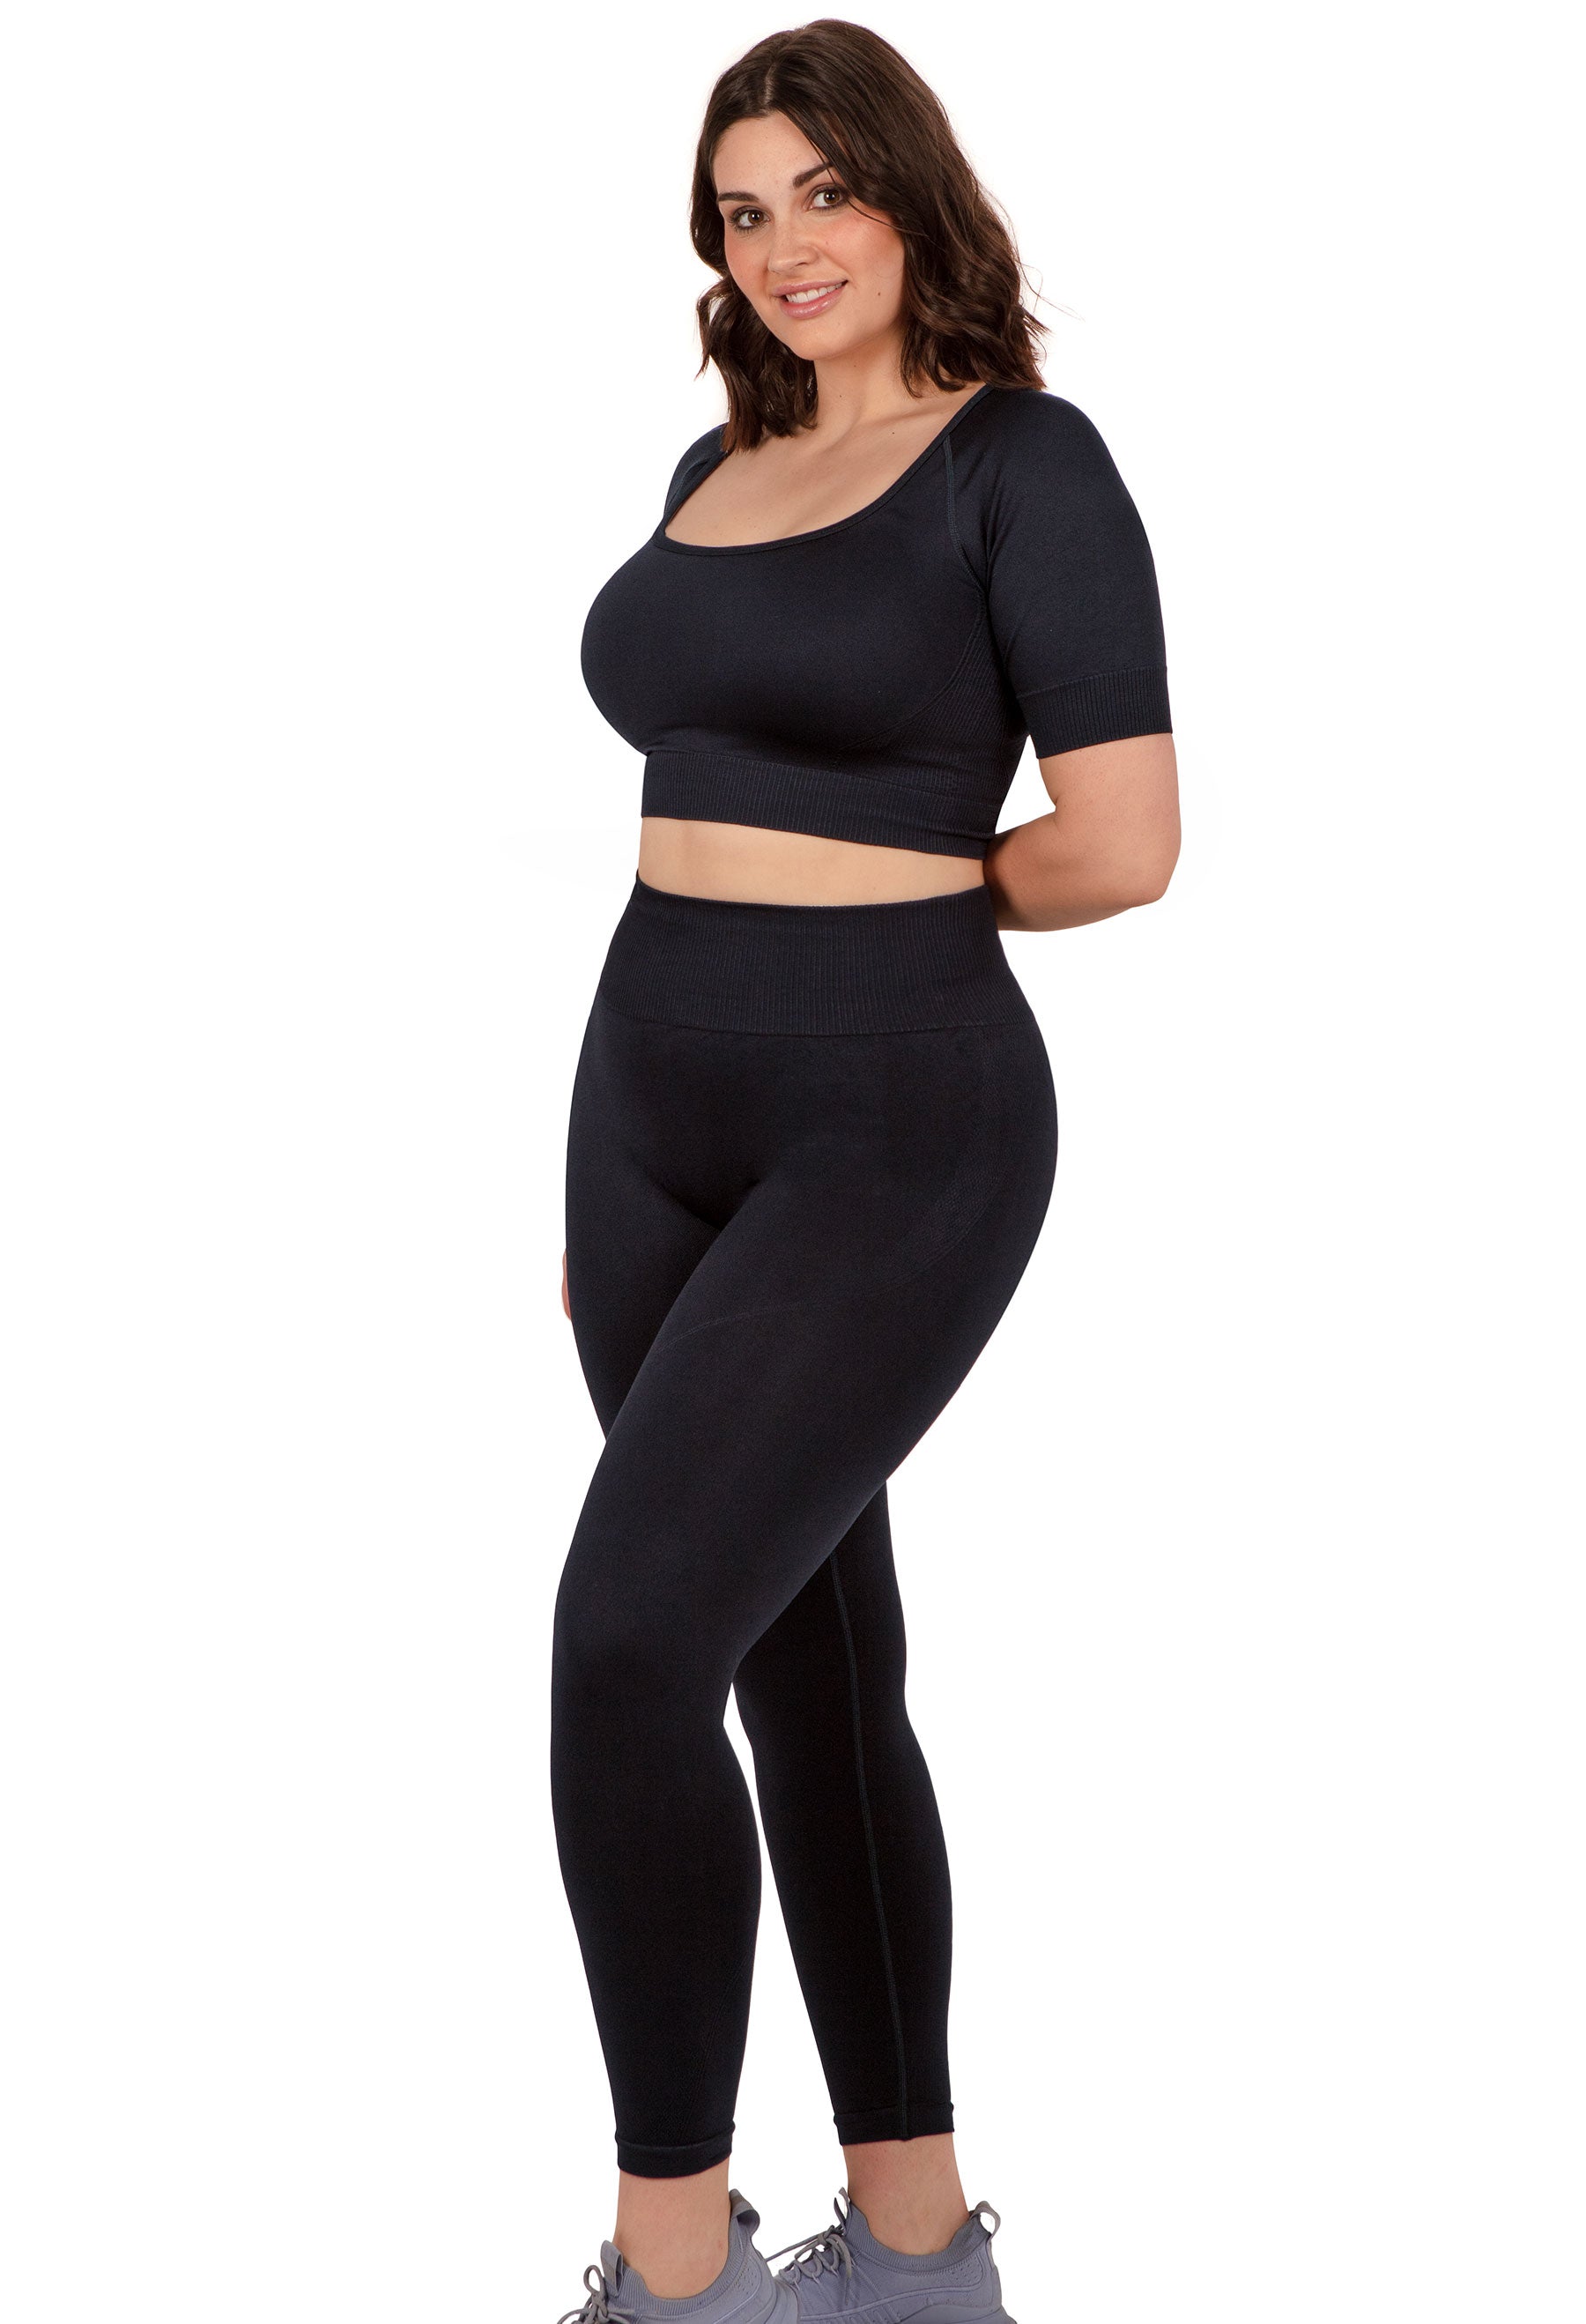 Womens Set Size Large Black Crop Top and Leggings